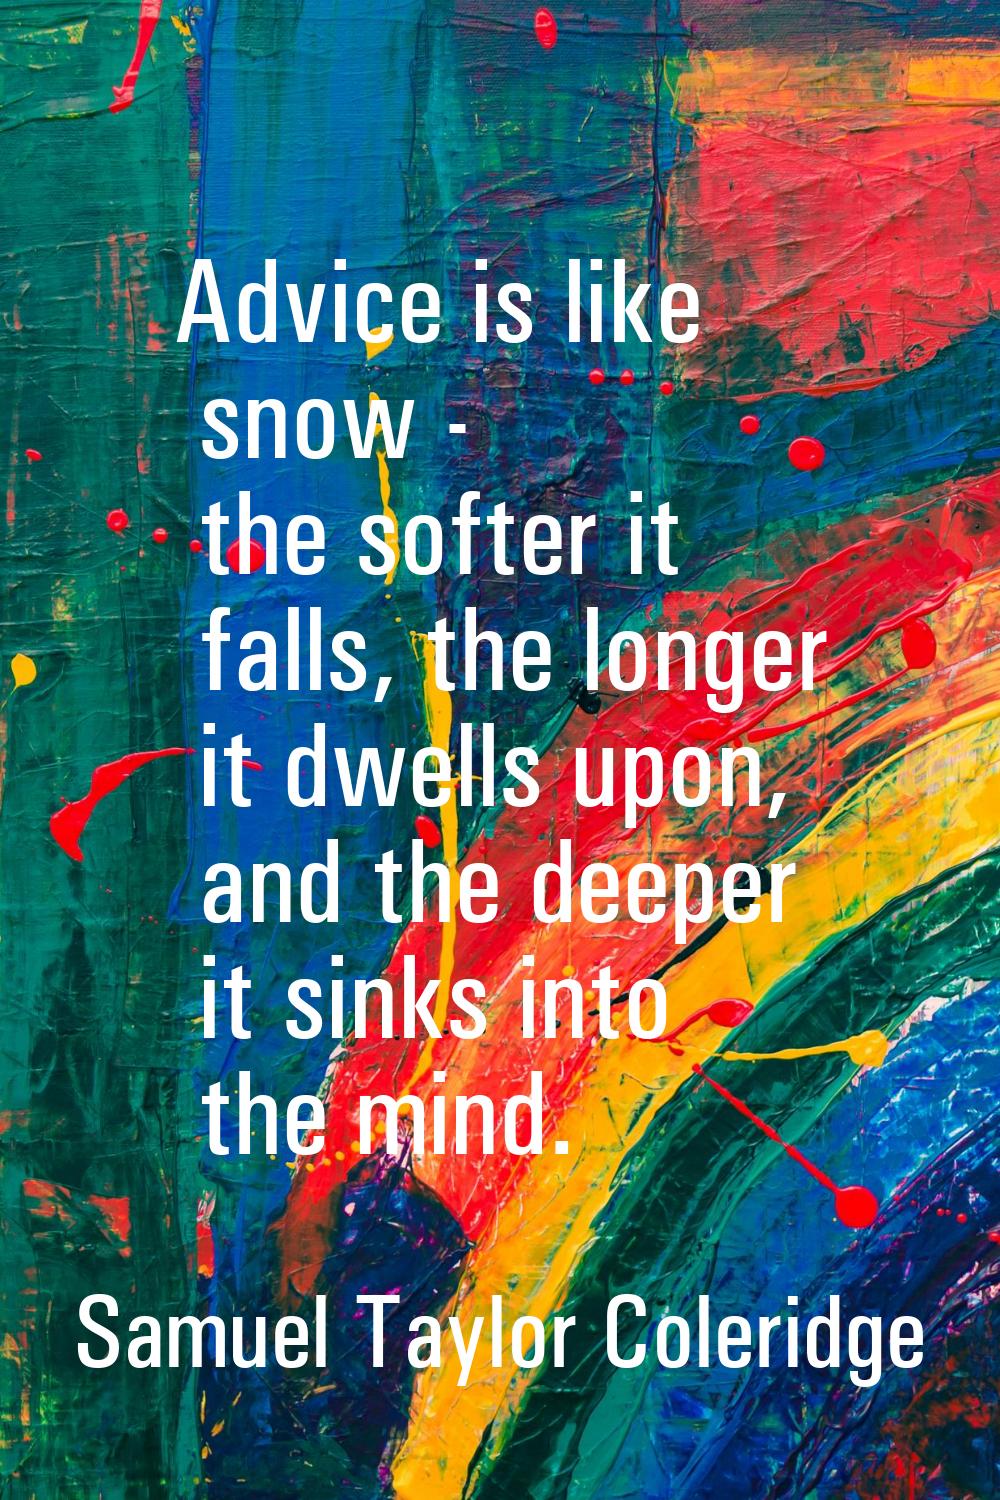 Advice is like snow - the softer it falls, the longer it dwells upon, and the deeper it sinks into 